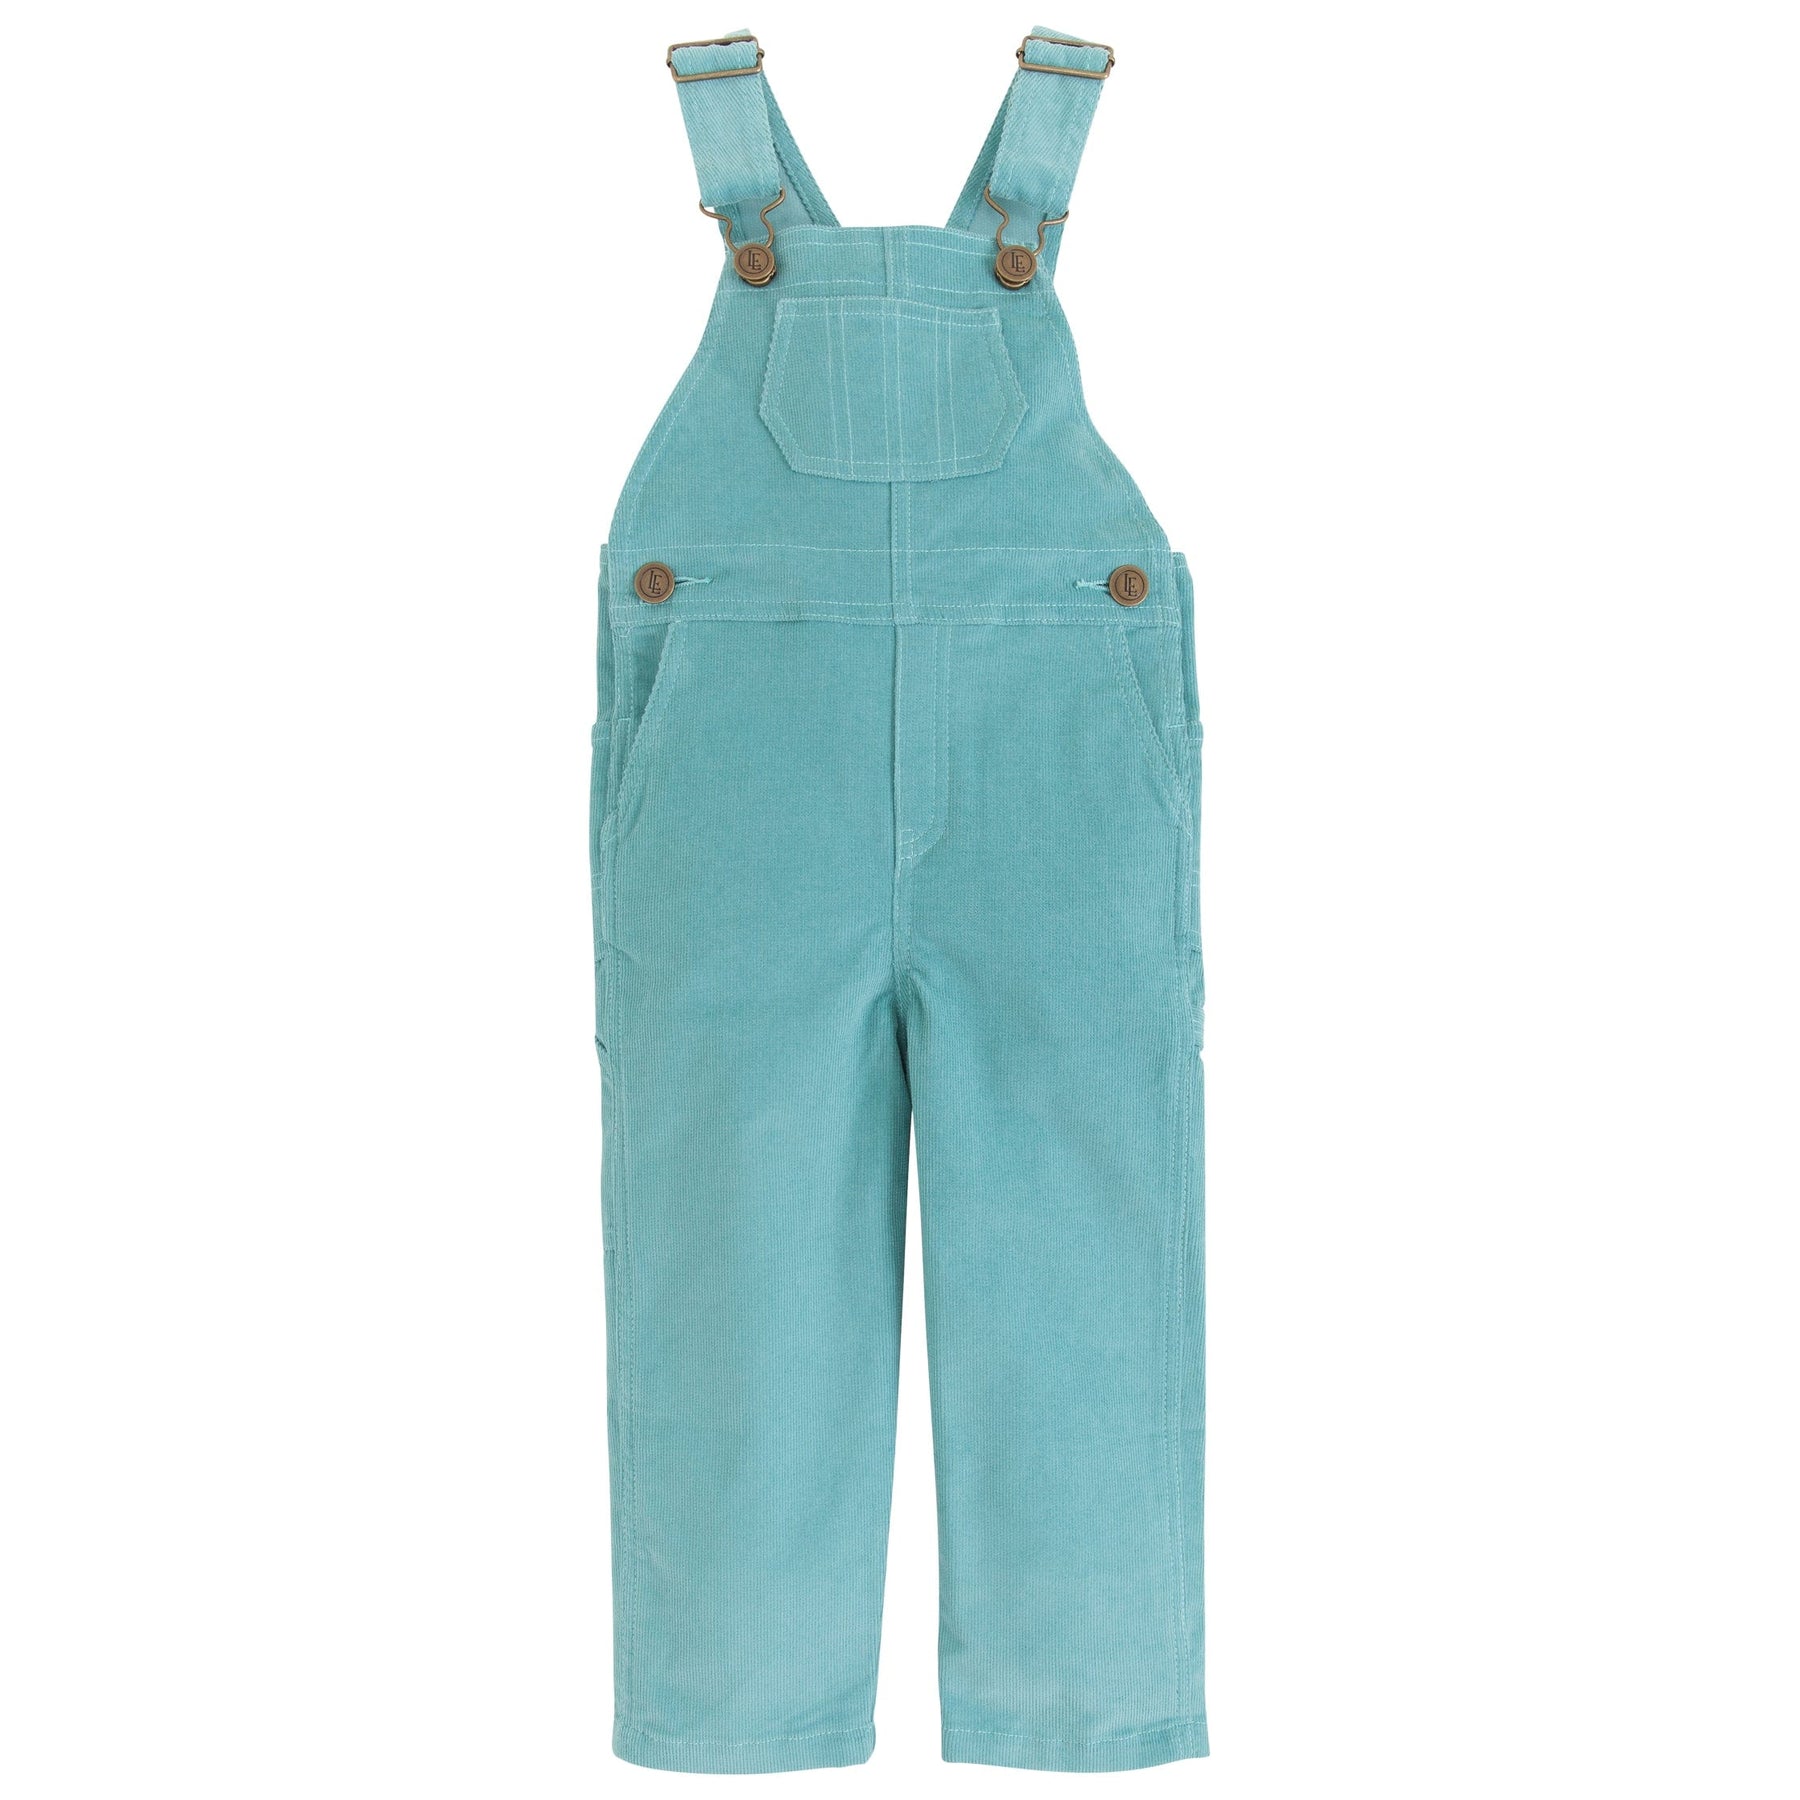 seguridadindustrialcr classic childrens clothing unisex green blue corduroy overall with brass buttons